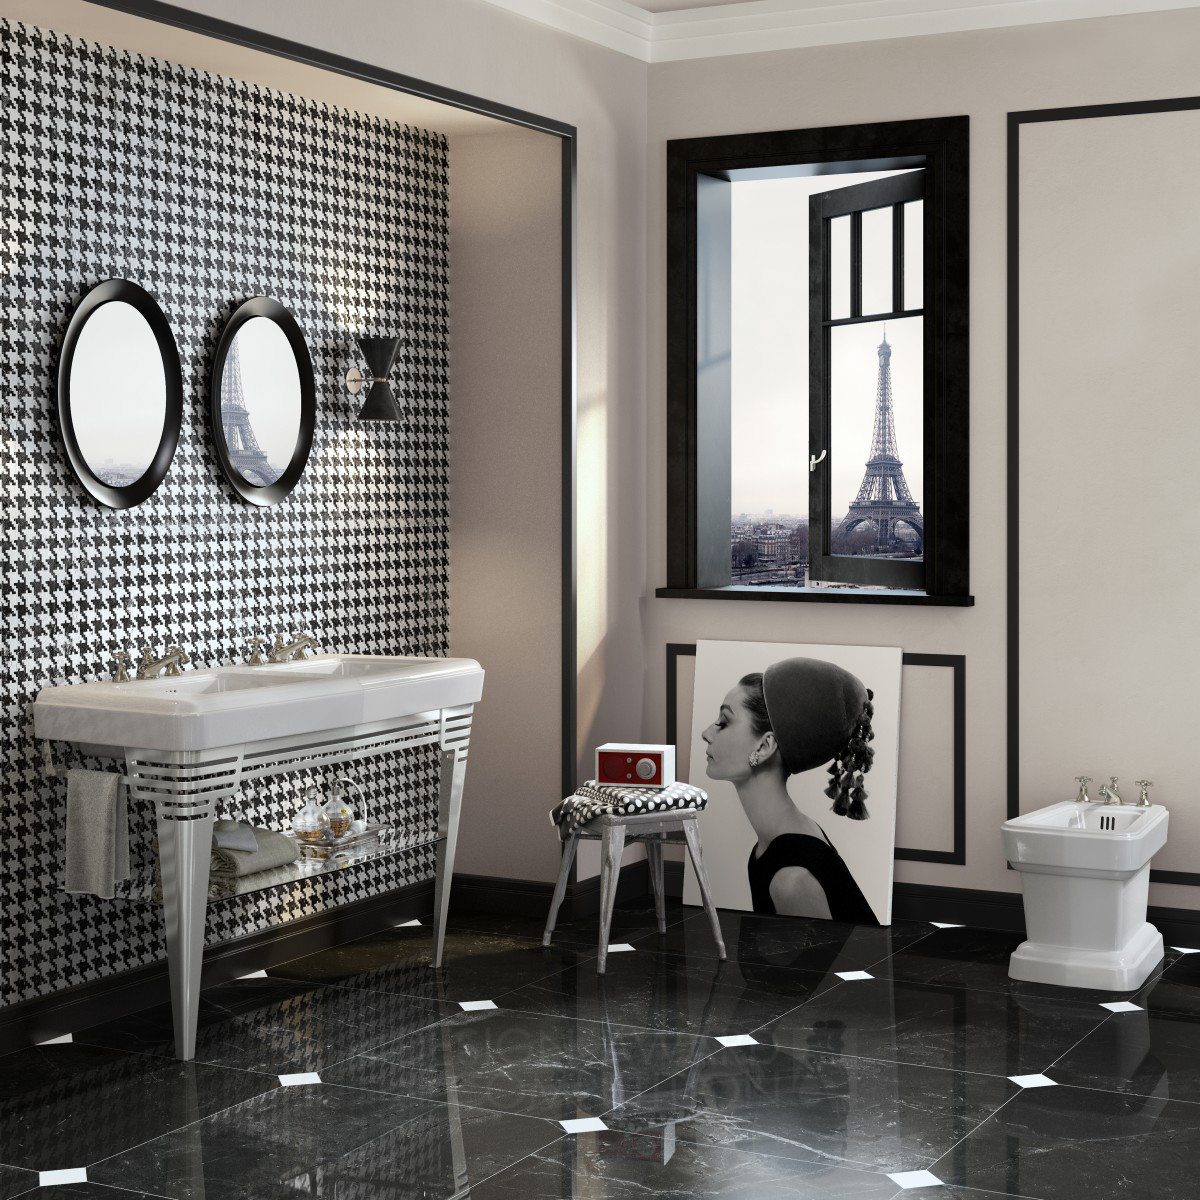 So Fifties Bathroom collection by Emanuele Pangrazi